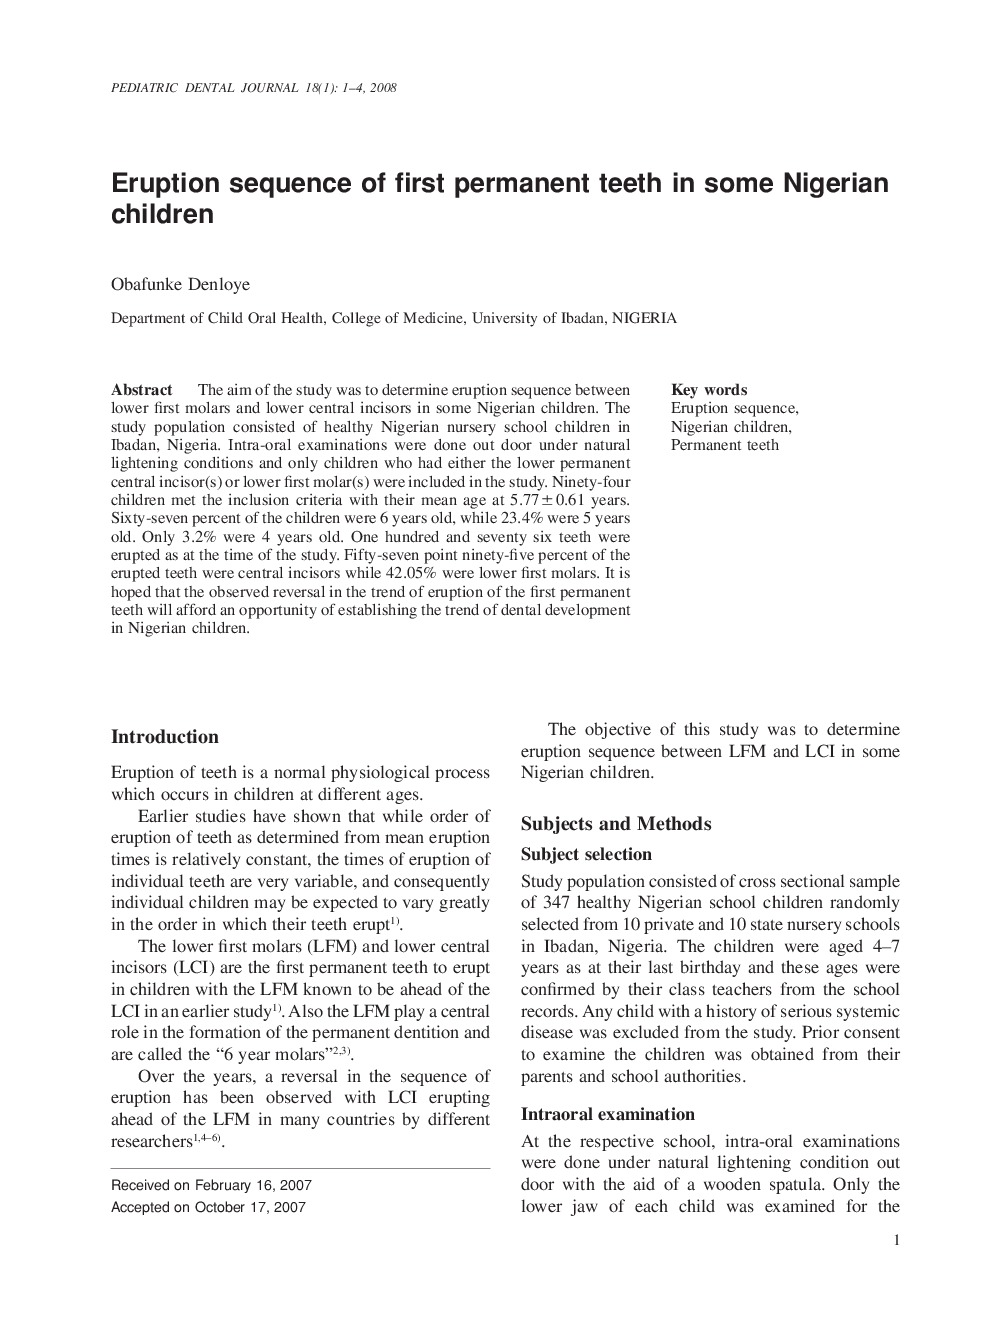 Eruption sequence of first permanent teeth in some Nigerian children